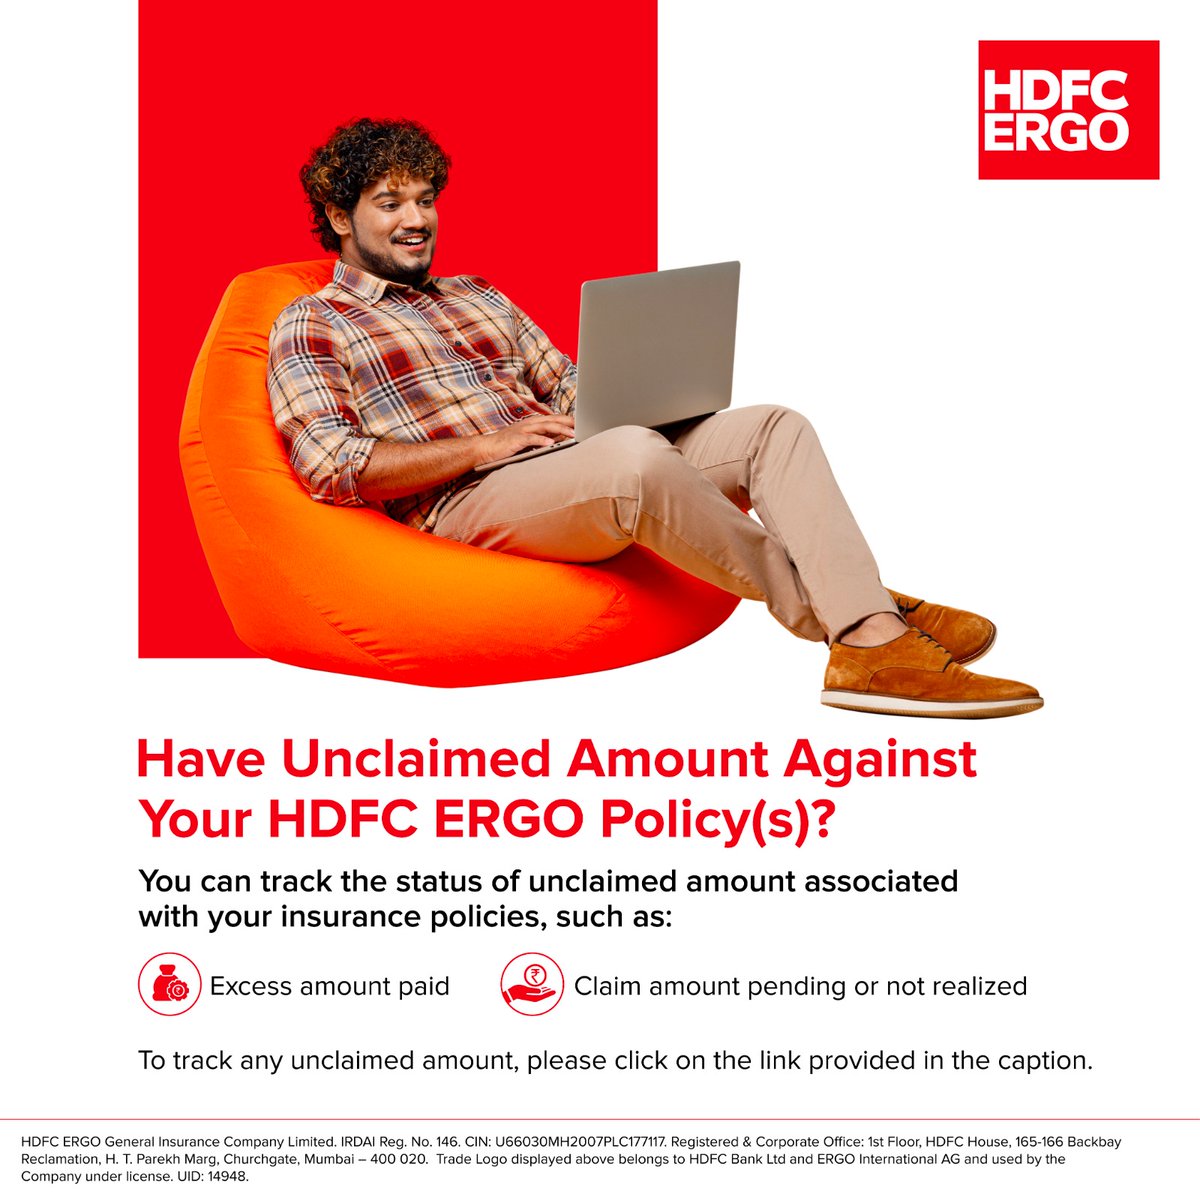 At HDFC ERGO, we're committed to helping you access what rightfully belongs to you. To monitor the status of your unclaimed amount, please follow the link -hdfcergo.com/claim/trackcla… #HDFCERGO #UnclaimedAmount #InsuranceClaims